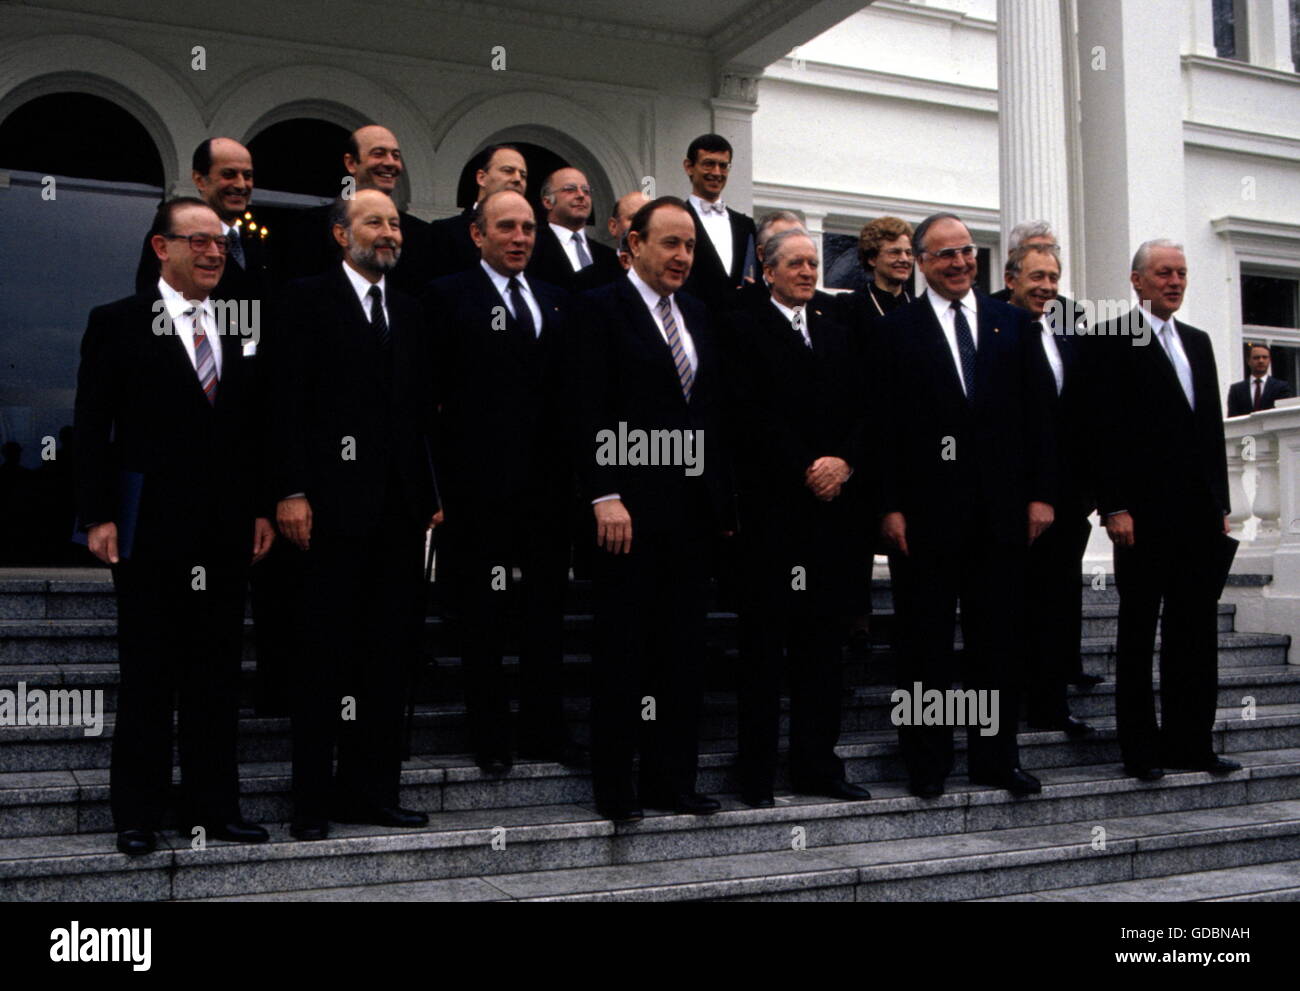 Kohl, Helmut, * 3.4.1930, German politician (CDU), chancellor 1.10.1982 - 27.9.1998, full length, group picture with his cabinet after his appointment, Villa Hammerschmidt, Bonn, 30.3.1983, Stock Photo